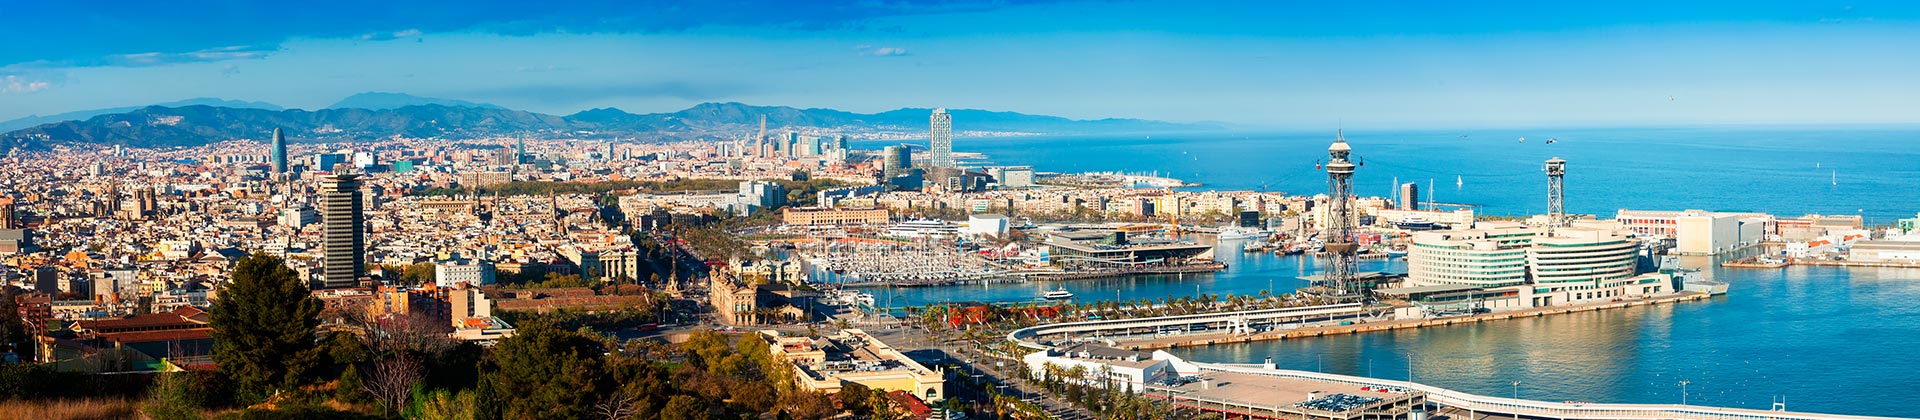 cruises departing from barcelona today